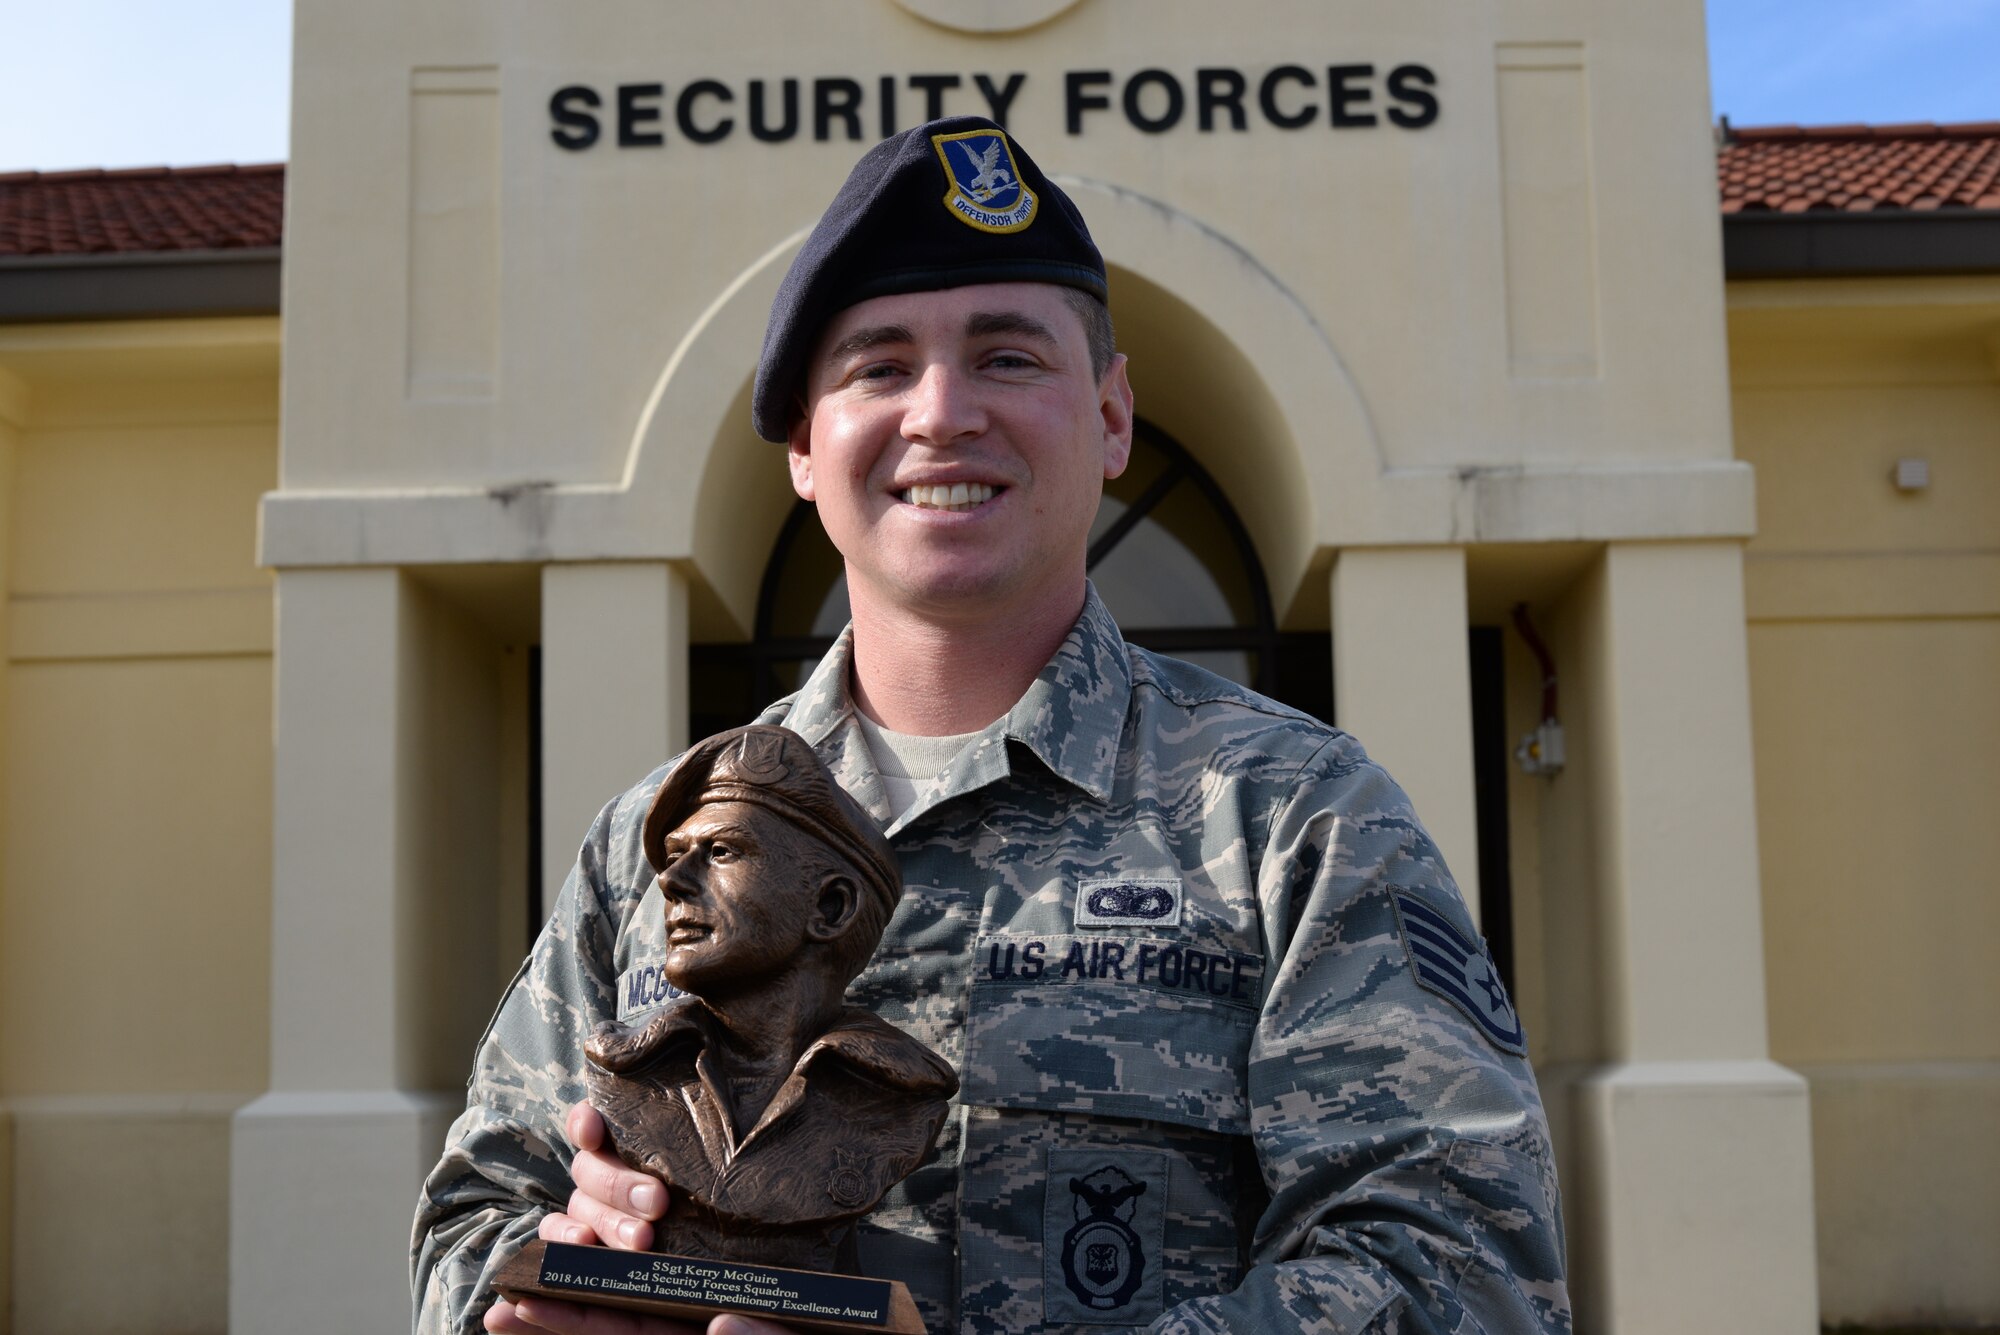 Staff Sgt. Kerry McGuire, 42nd Security Forces Squadron non - commission officer in charge of Physical and Electronic Security, won the Airman 1st Class Elizabeth N. Jacobson Award for Expeditionary Excellence on November 6th, 2018. The U.S. Air Force level award is given to Airmen for outstanding performance while deployed overseas. (U.S. Air Force Photo by Senior Airman Francisco Melendez – Espinosa